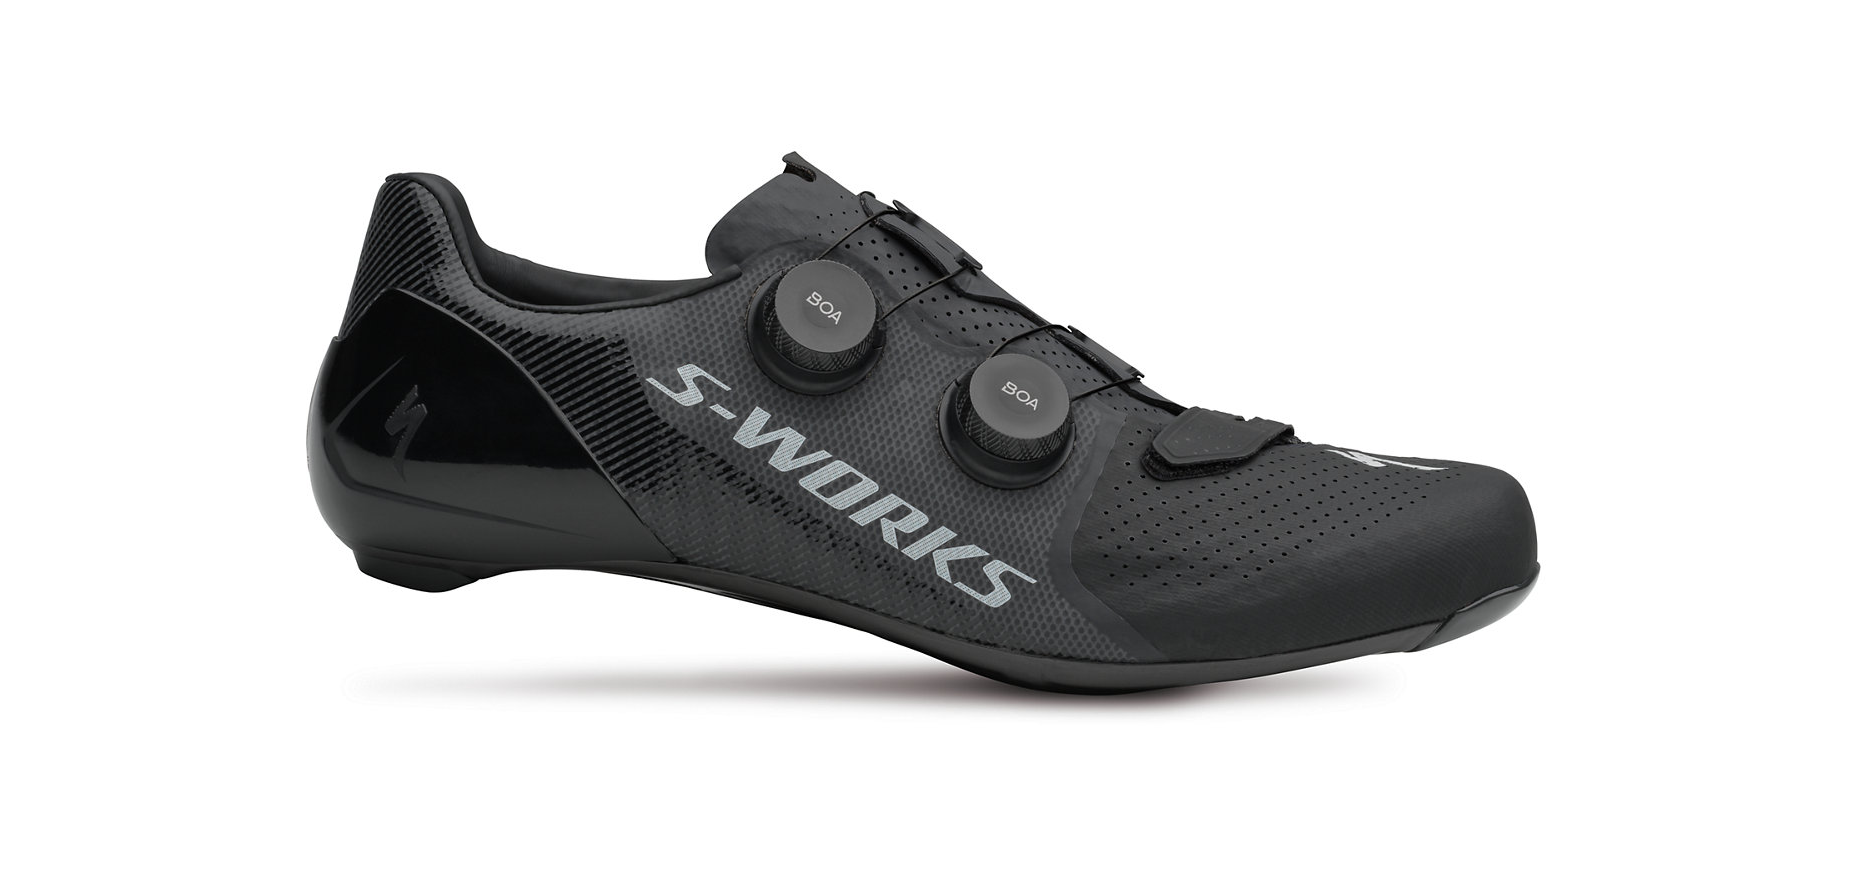 S-Works 7 Road Shoe - CANARY CYCLES